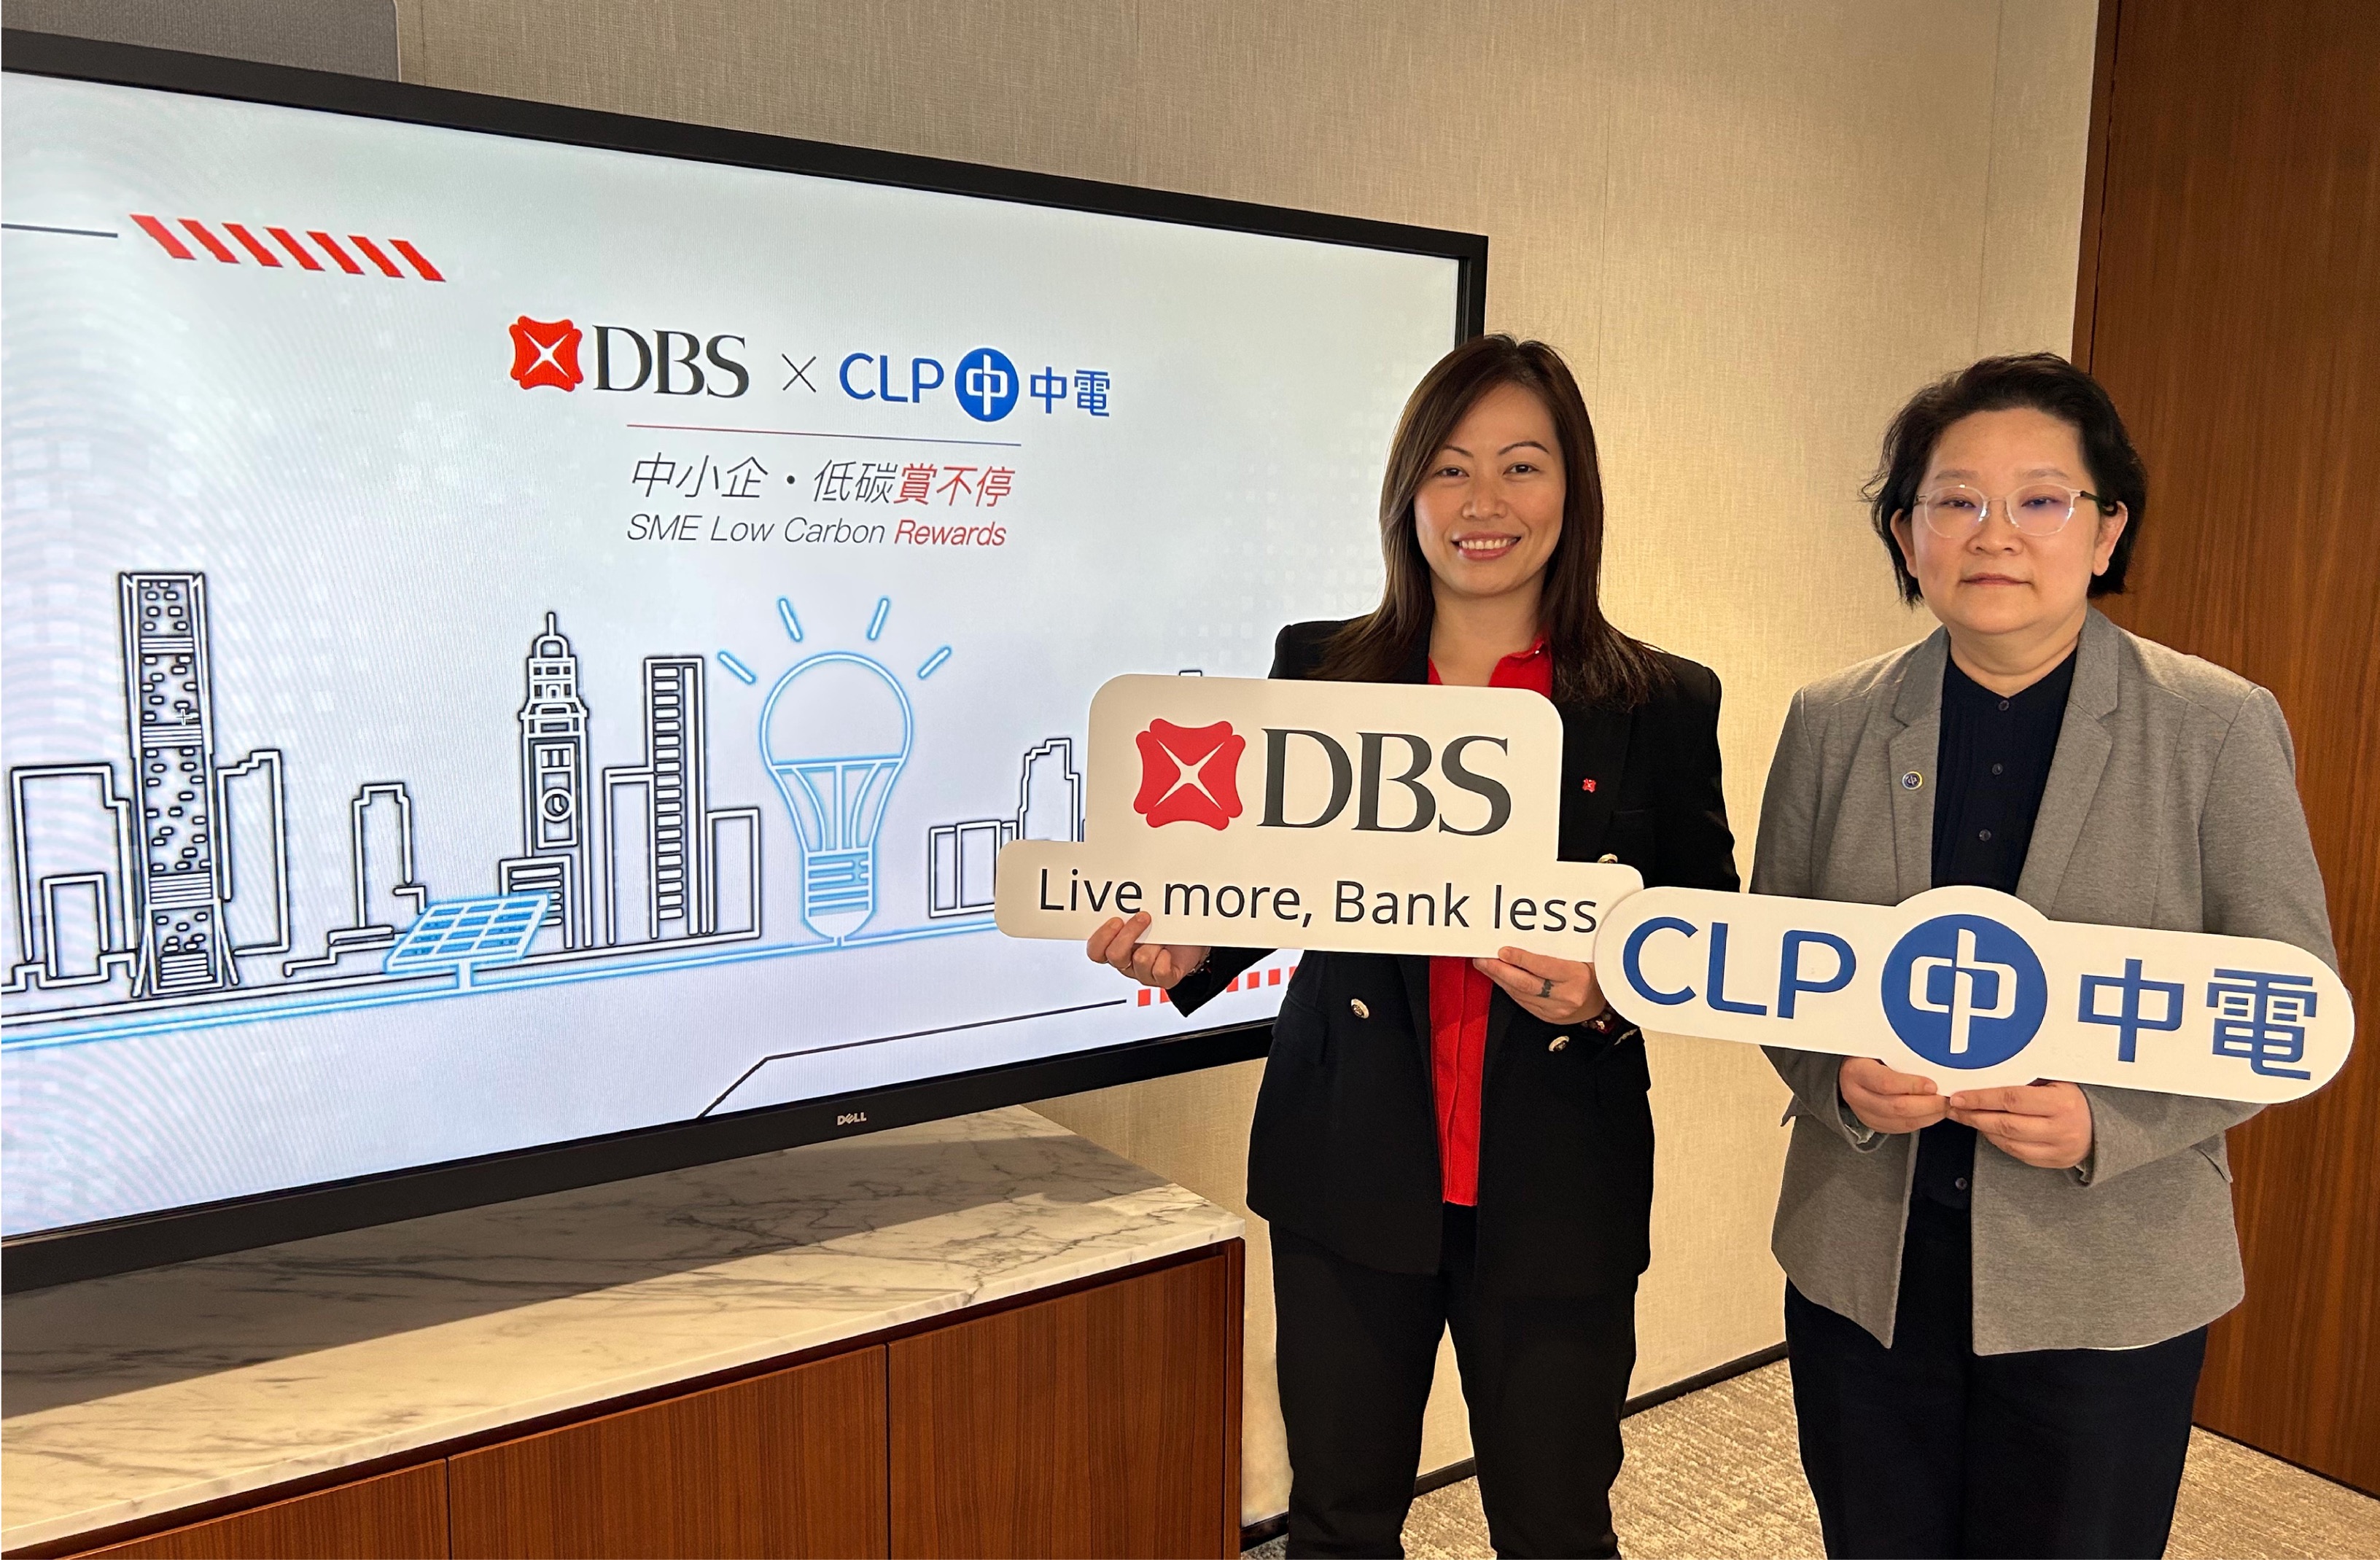 DBS Hong Kong and CLP Power expand partnership to launch a new “SME Low-carbon Rewards” programme that aims to support SMEs’ low-carbon transition while supporting the development of local renewable energy and promoting digital payment services adoption. (From left) Ms Jolynn Wong, Managing Director and Head of SME Banking, DBS Bank (Hong Kong) Limited and Ms Lena Low, Senior Director, Customer Success & Experience of CLP Power.